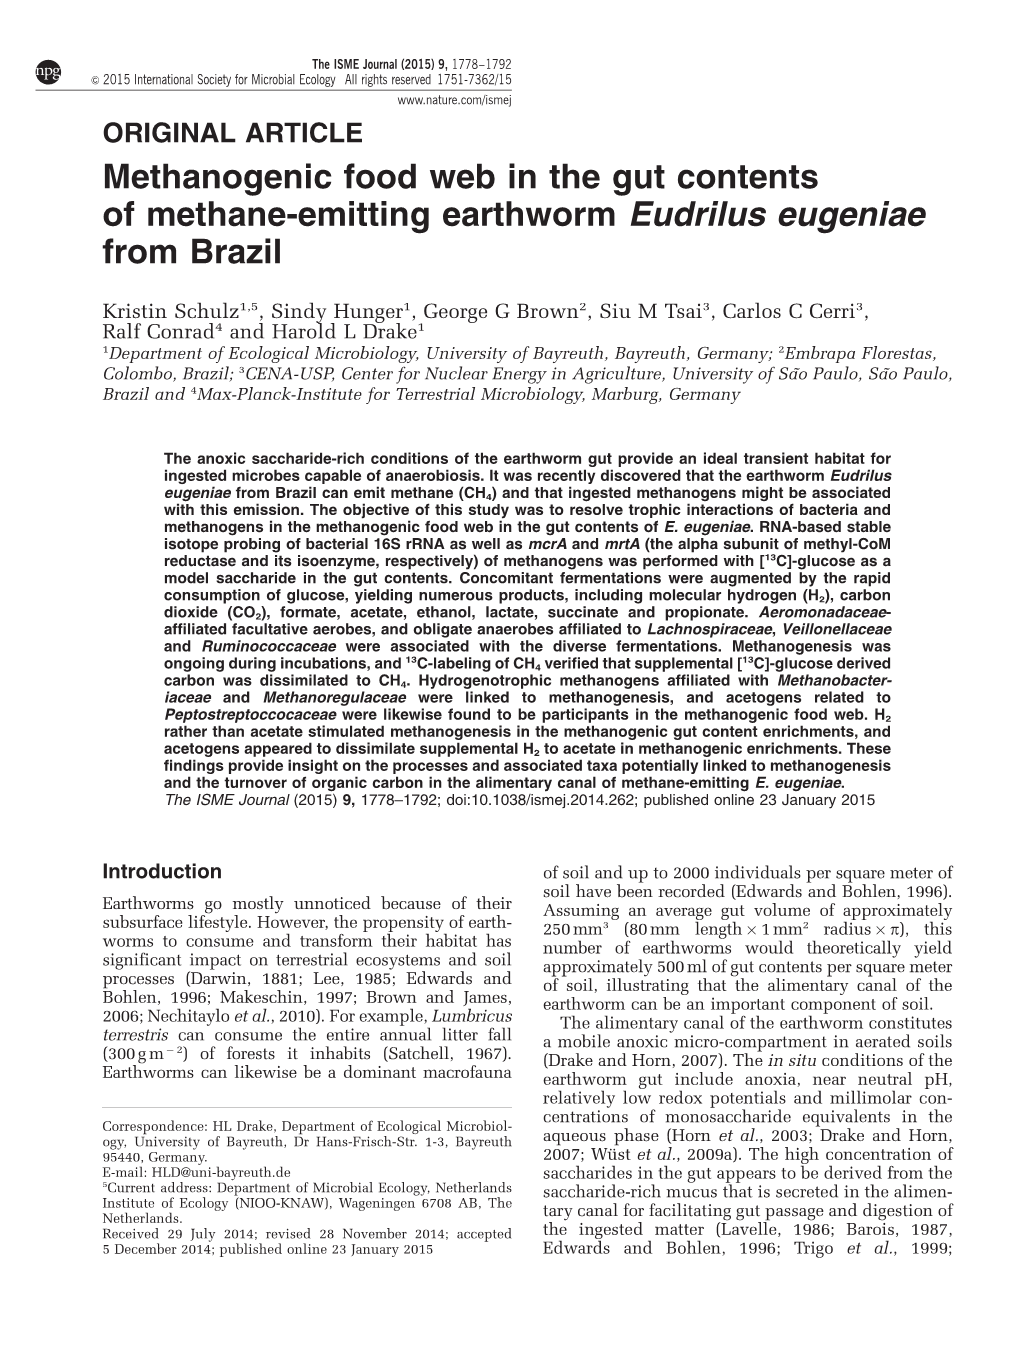 Methanogenic Food Web in the Gut Contents of Methane-Emitting Earthworm Eudrilus Eugeniae from Brazil